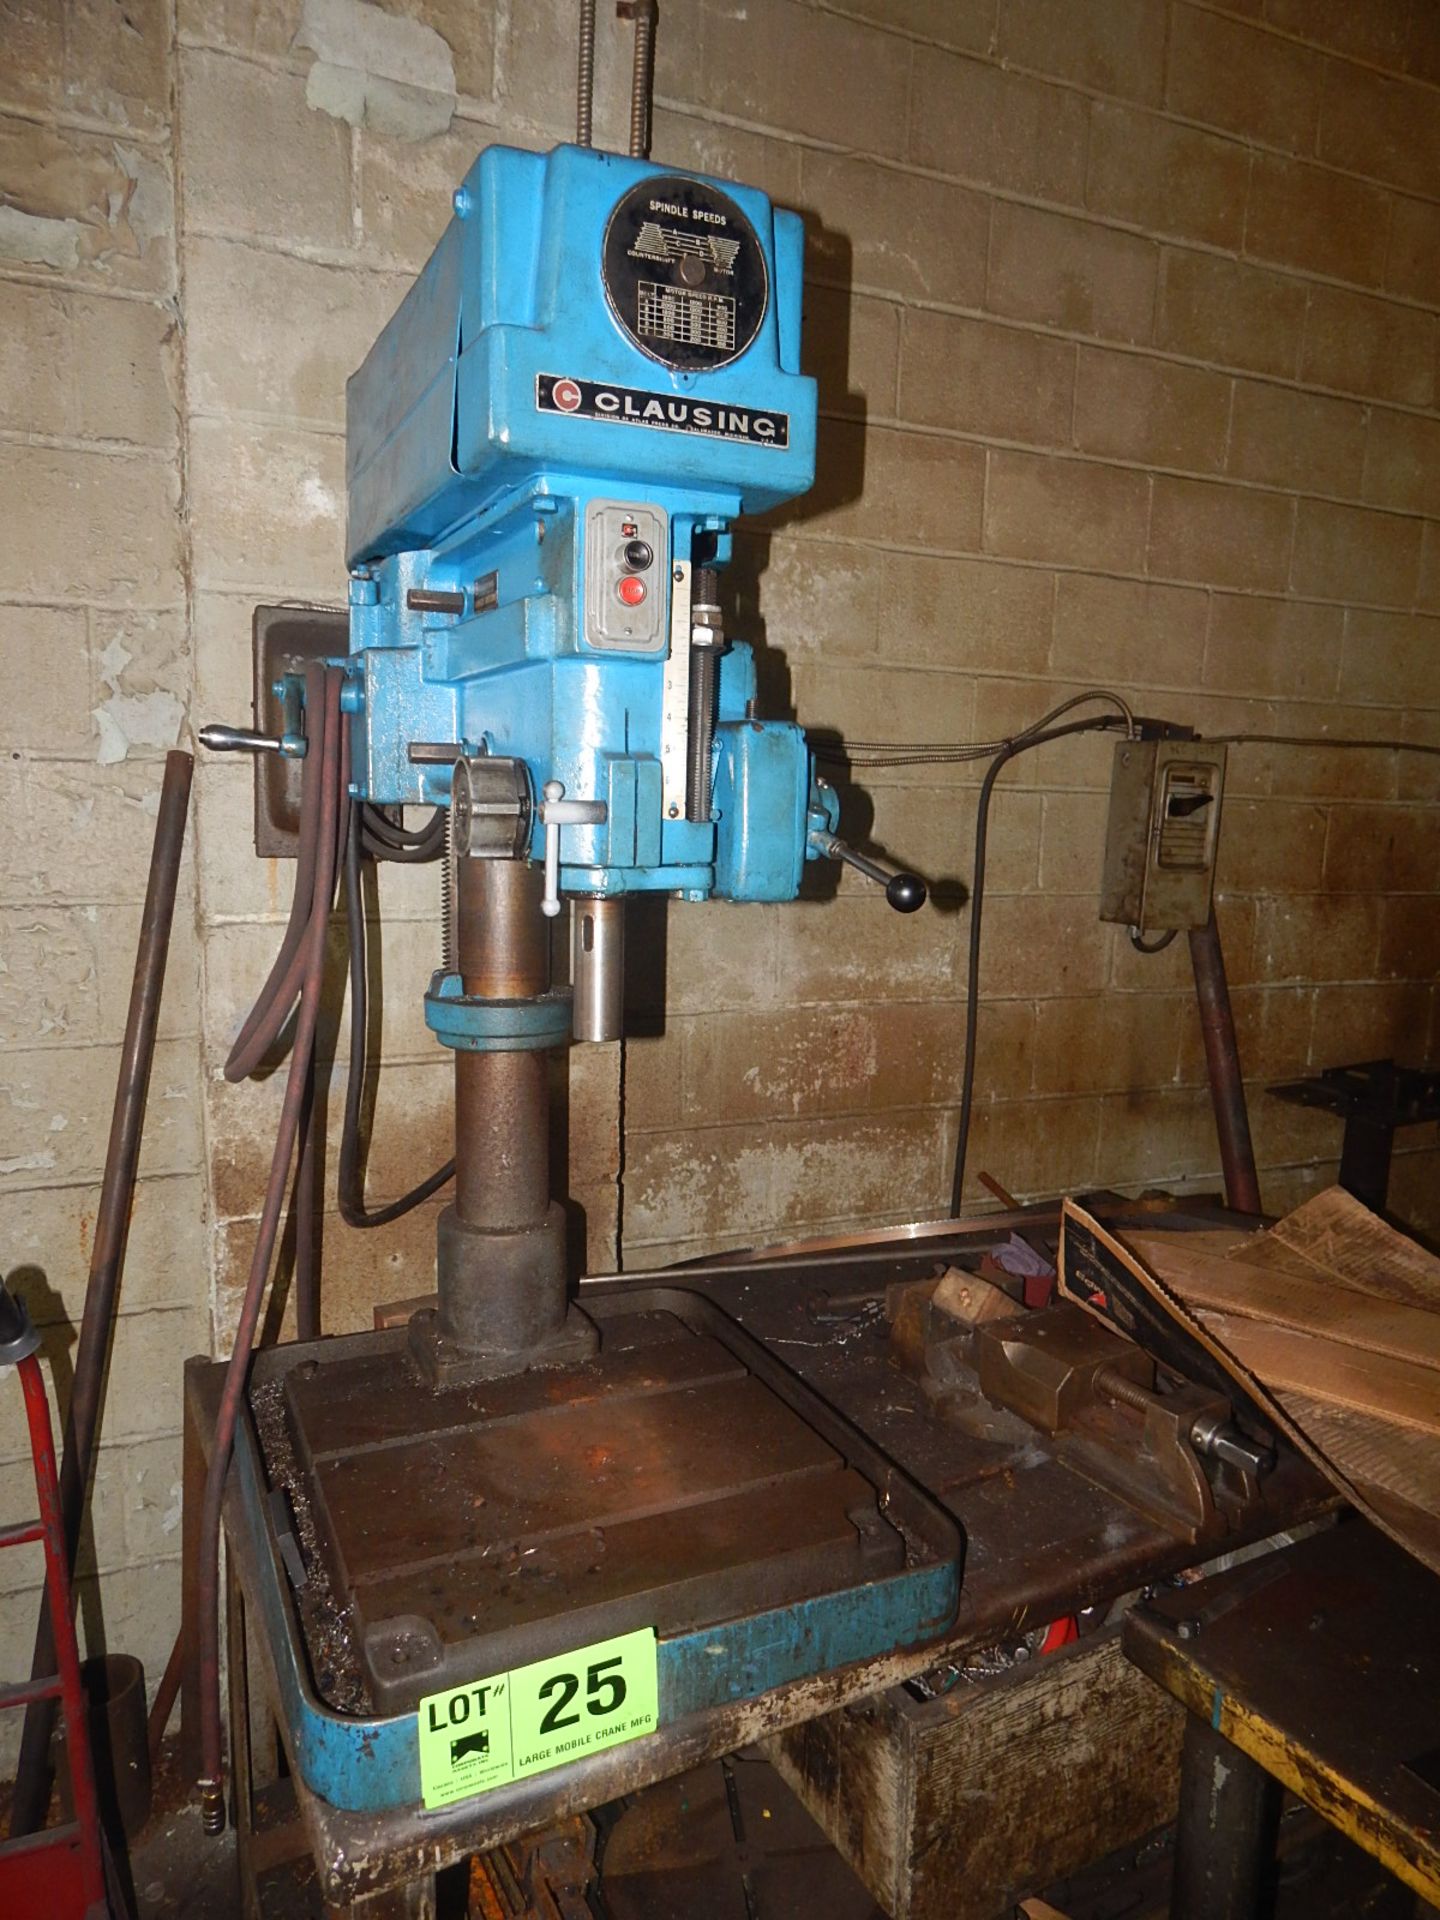 CLAUSING 2244 HEAVY DUTY BENCH-TYPE DRILL PRESS WITH SPEEDS TO 2000 RPM, S/N: 103637 (CI) - Image 2 of 2